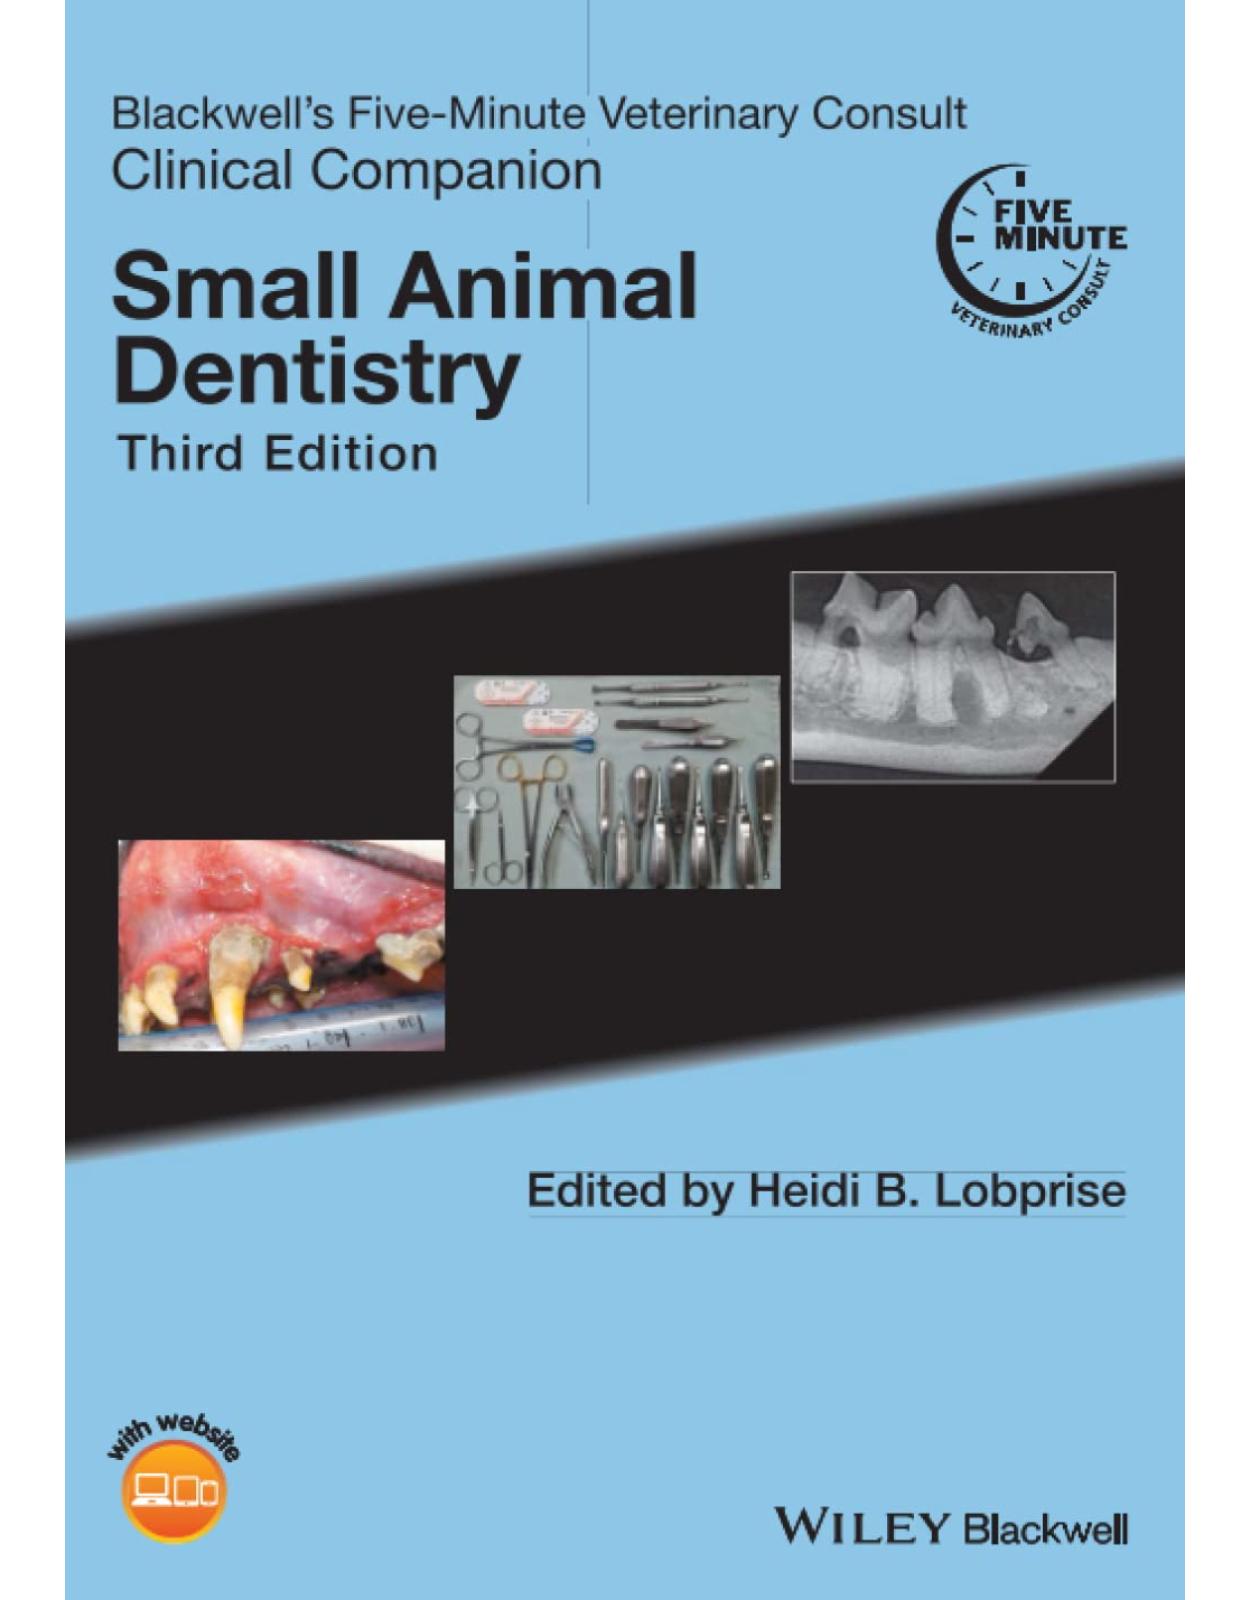 Blackwell’s Five-Minute Veterinary Consult Clinical Companion: Small Animal Dentistry